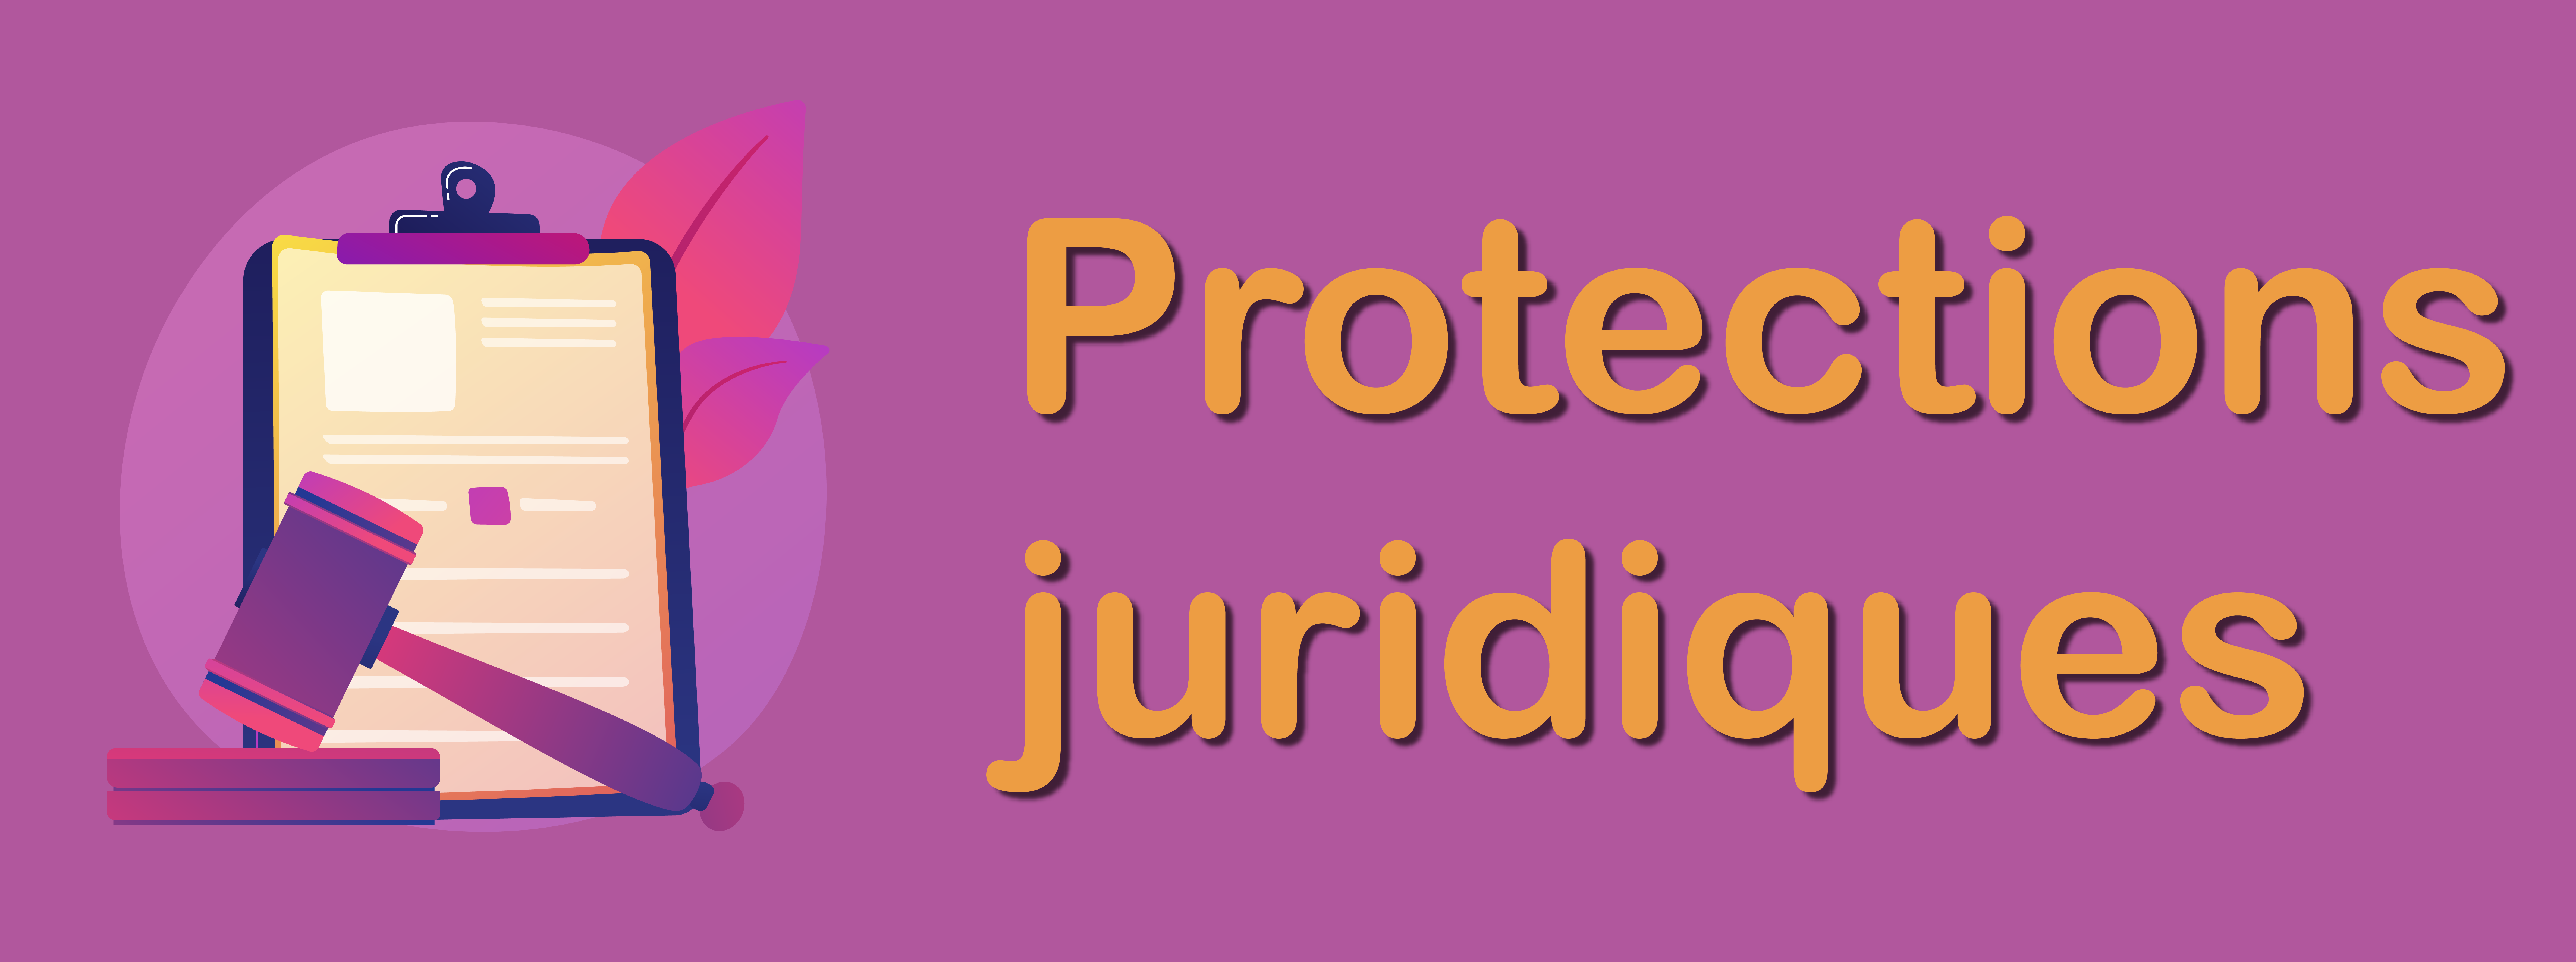 2276x850_Protections_juridiques-01.png